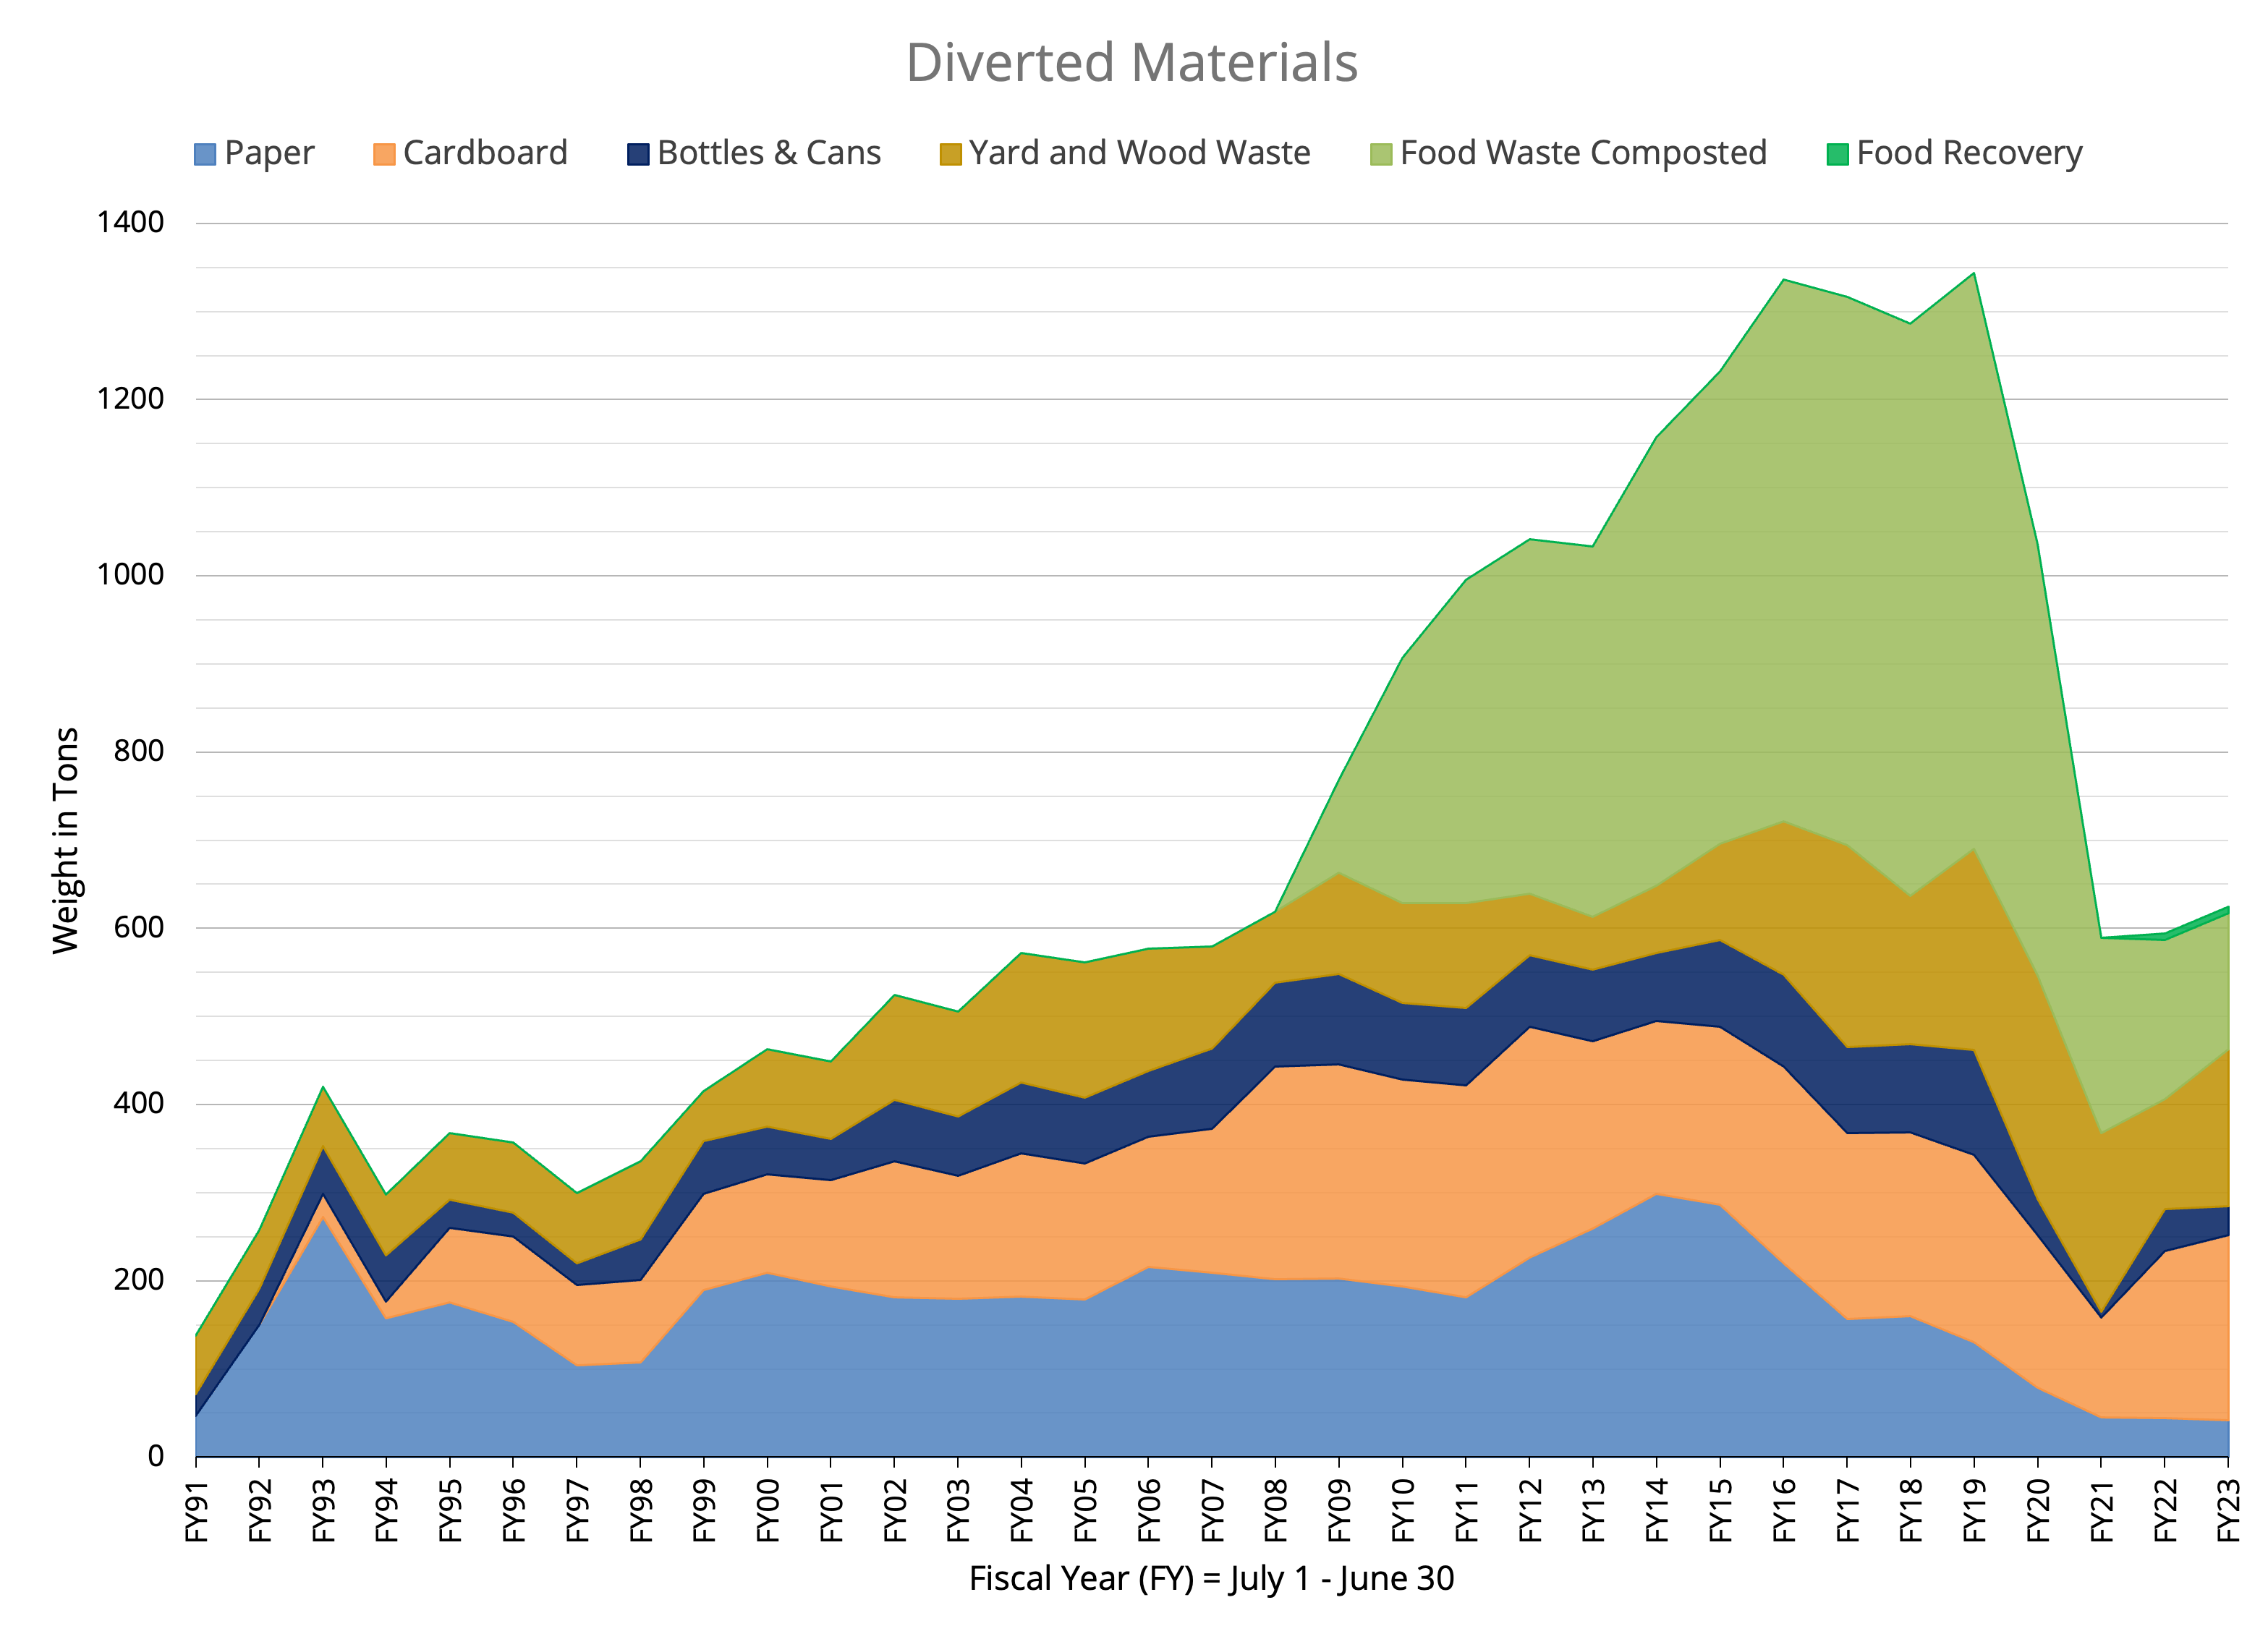 Diverted Materials since FY91